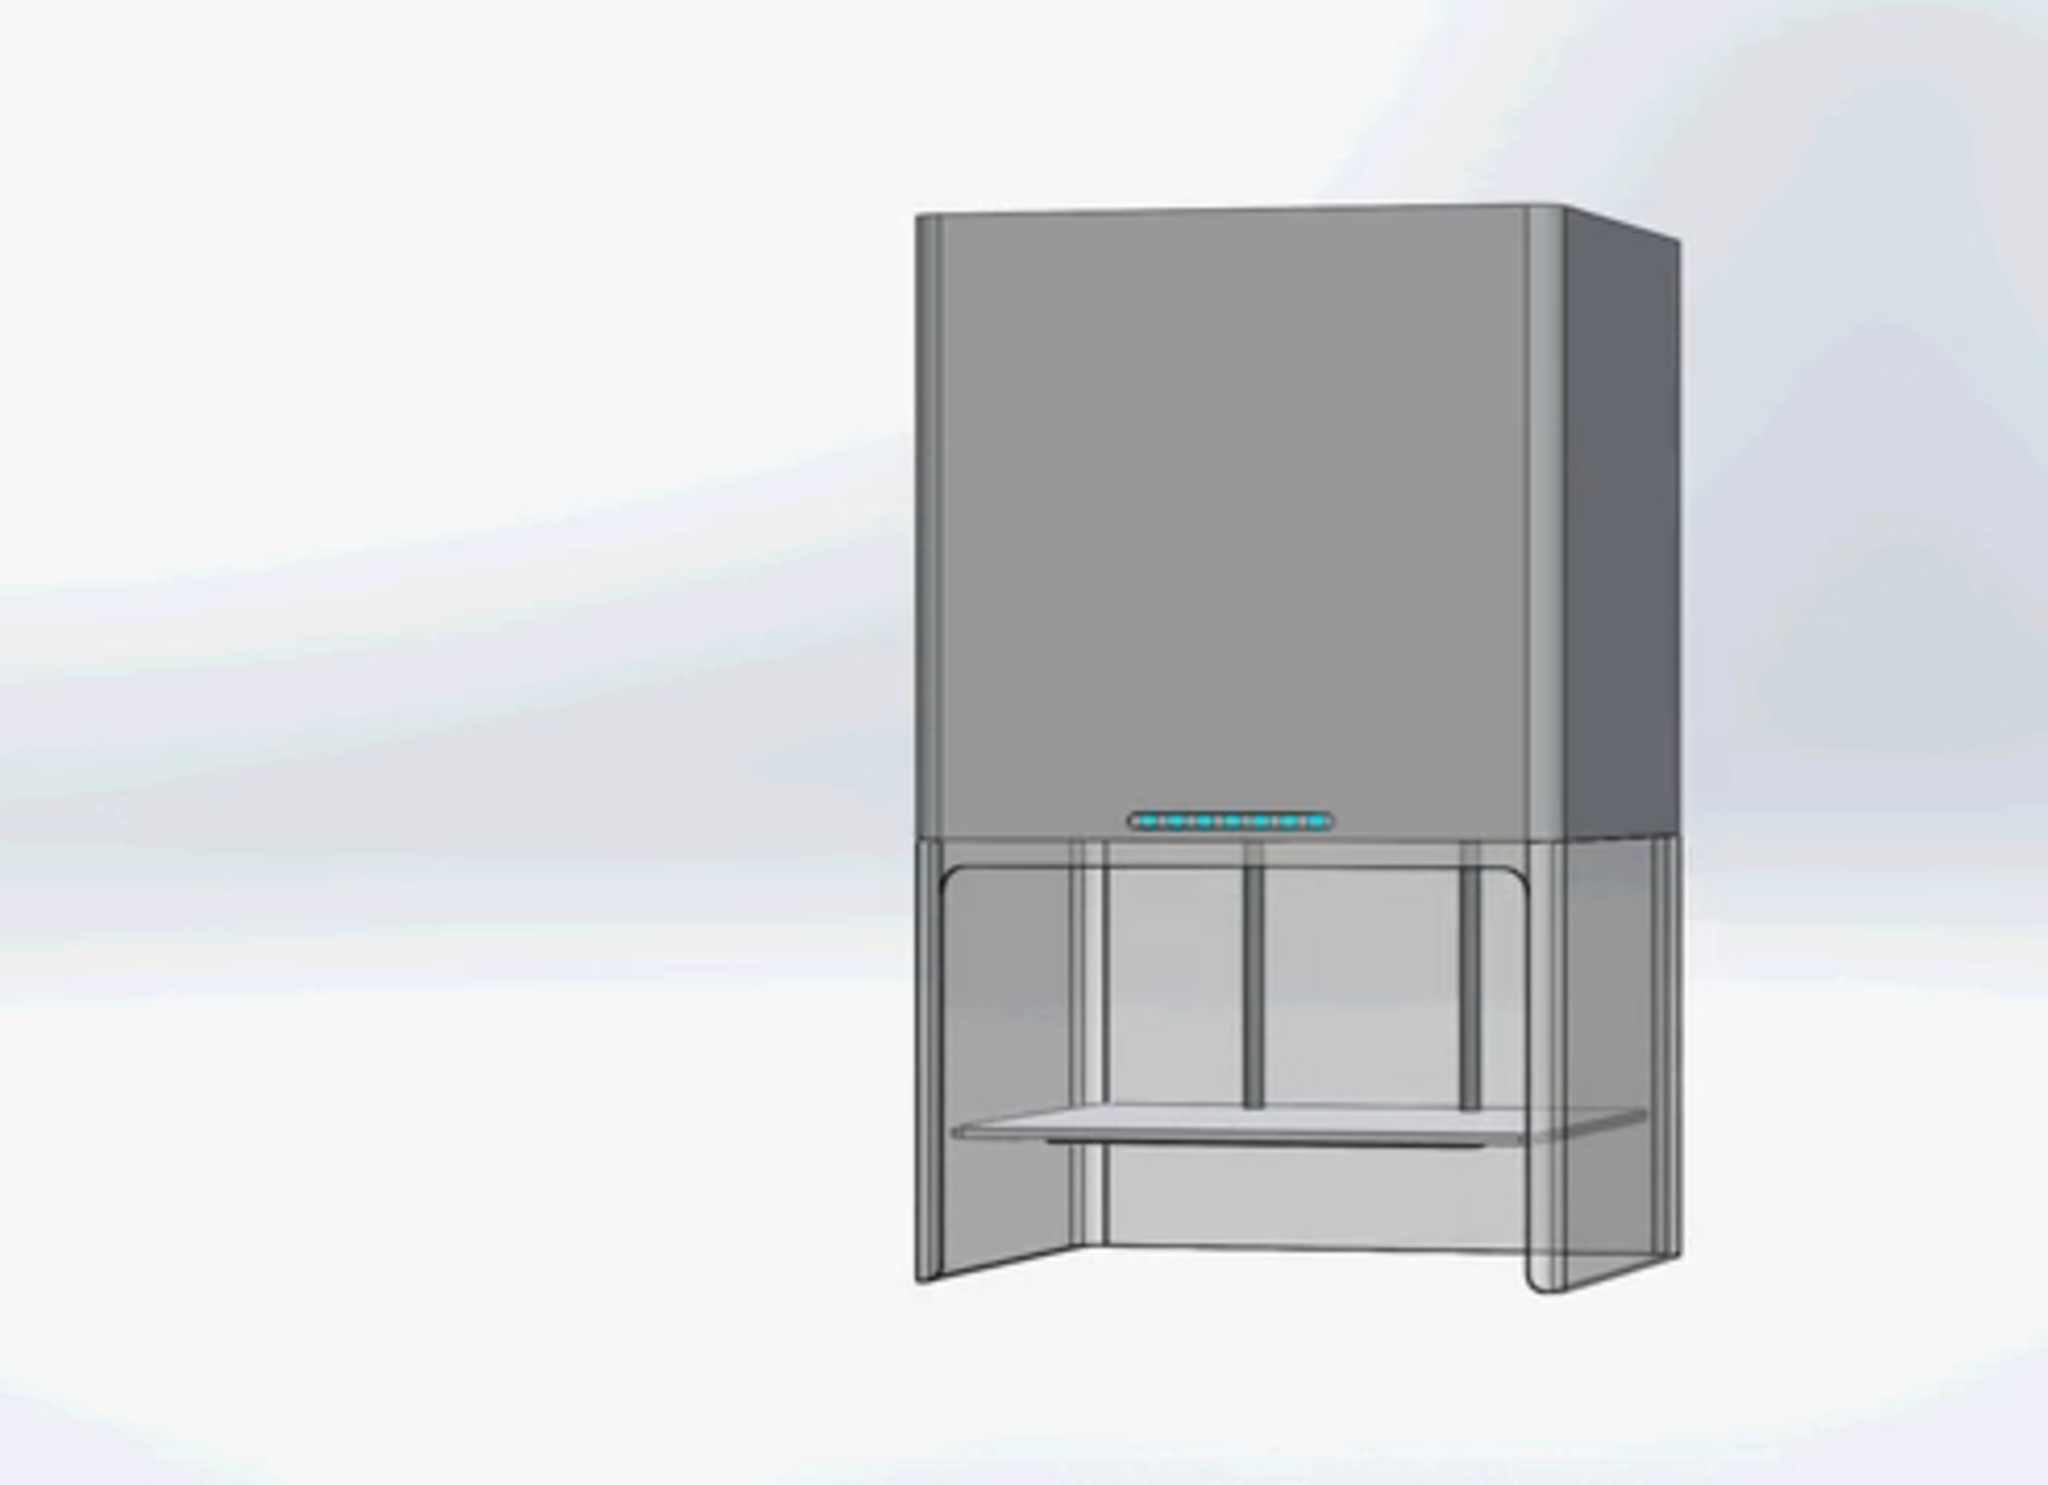 The design for The Buccaneer 3D printer, an affordable model built for domestic use